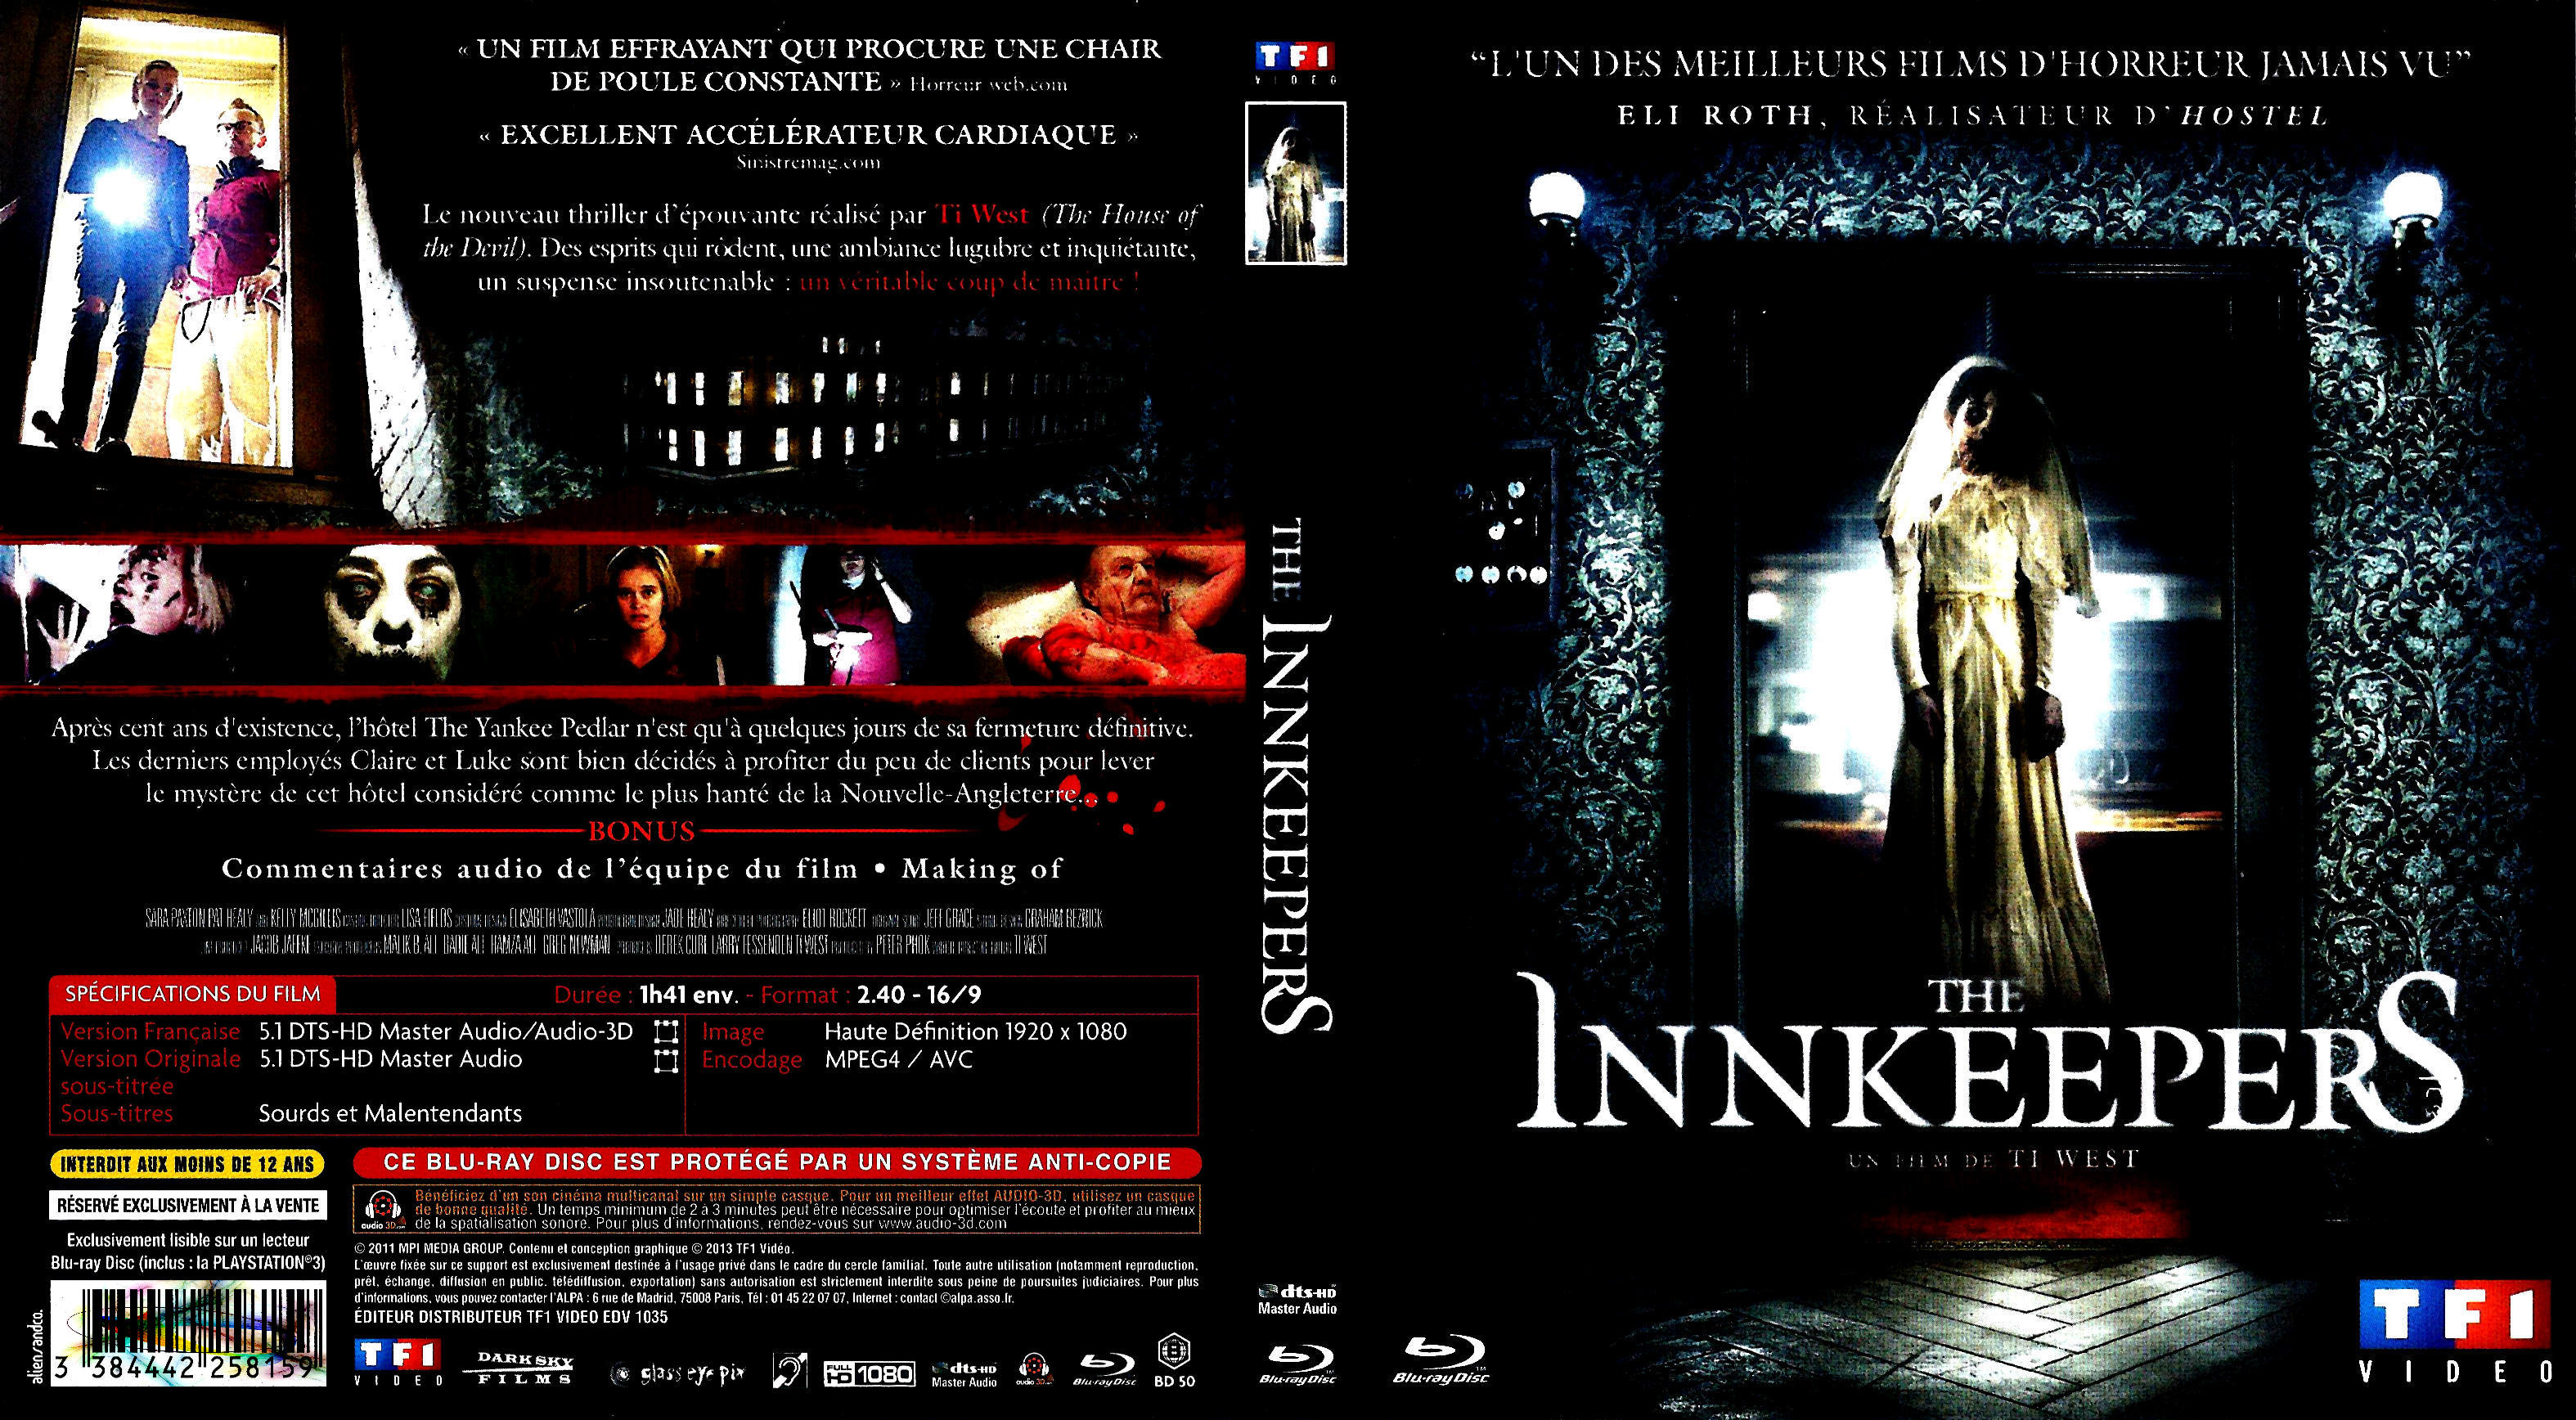 Jaquette DVD The innkeepers (BLU-RAY)